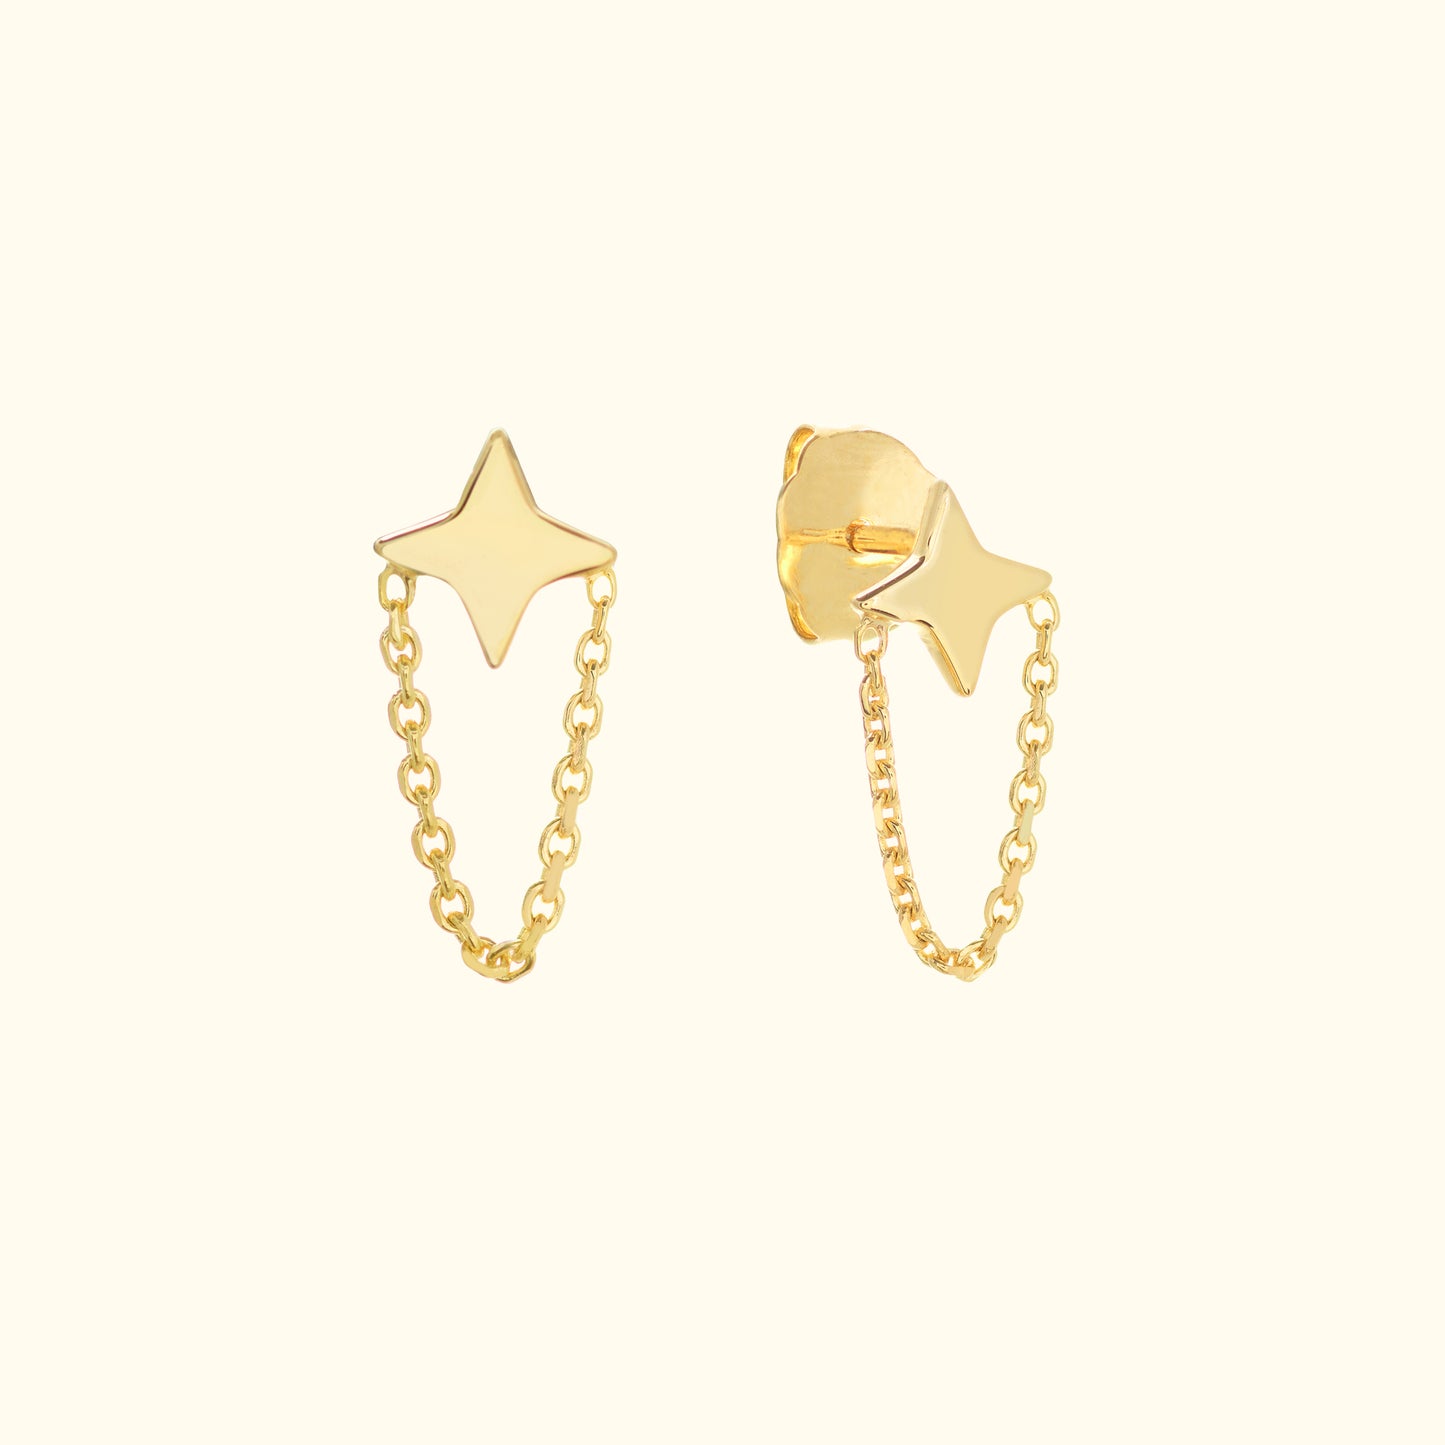 North Star Earrings with Chain Drape